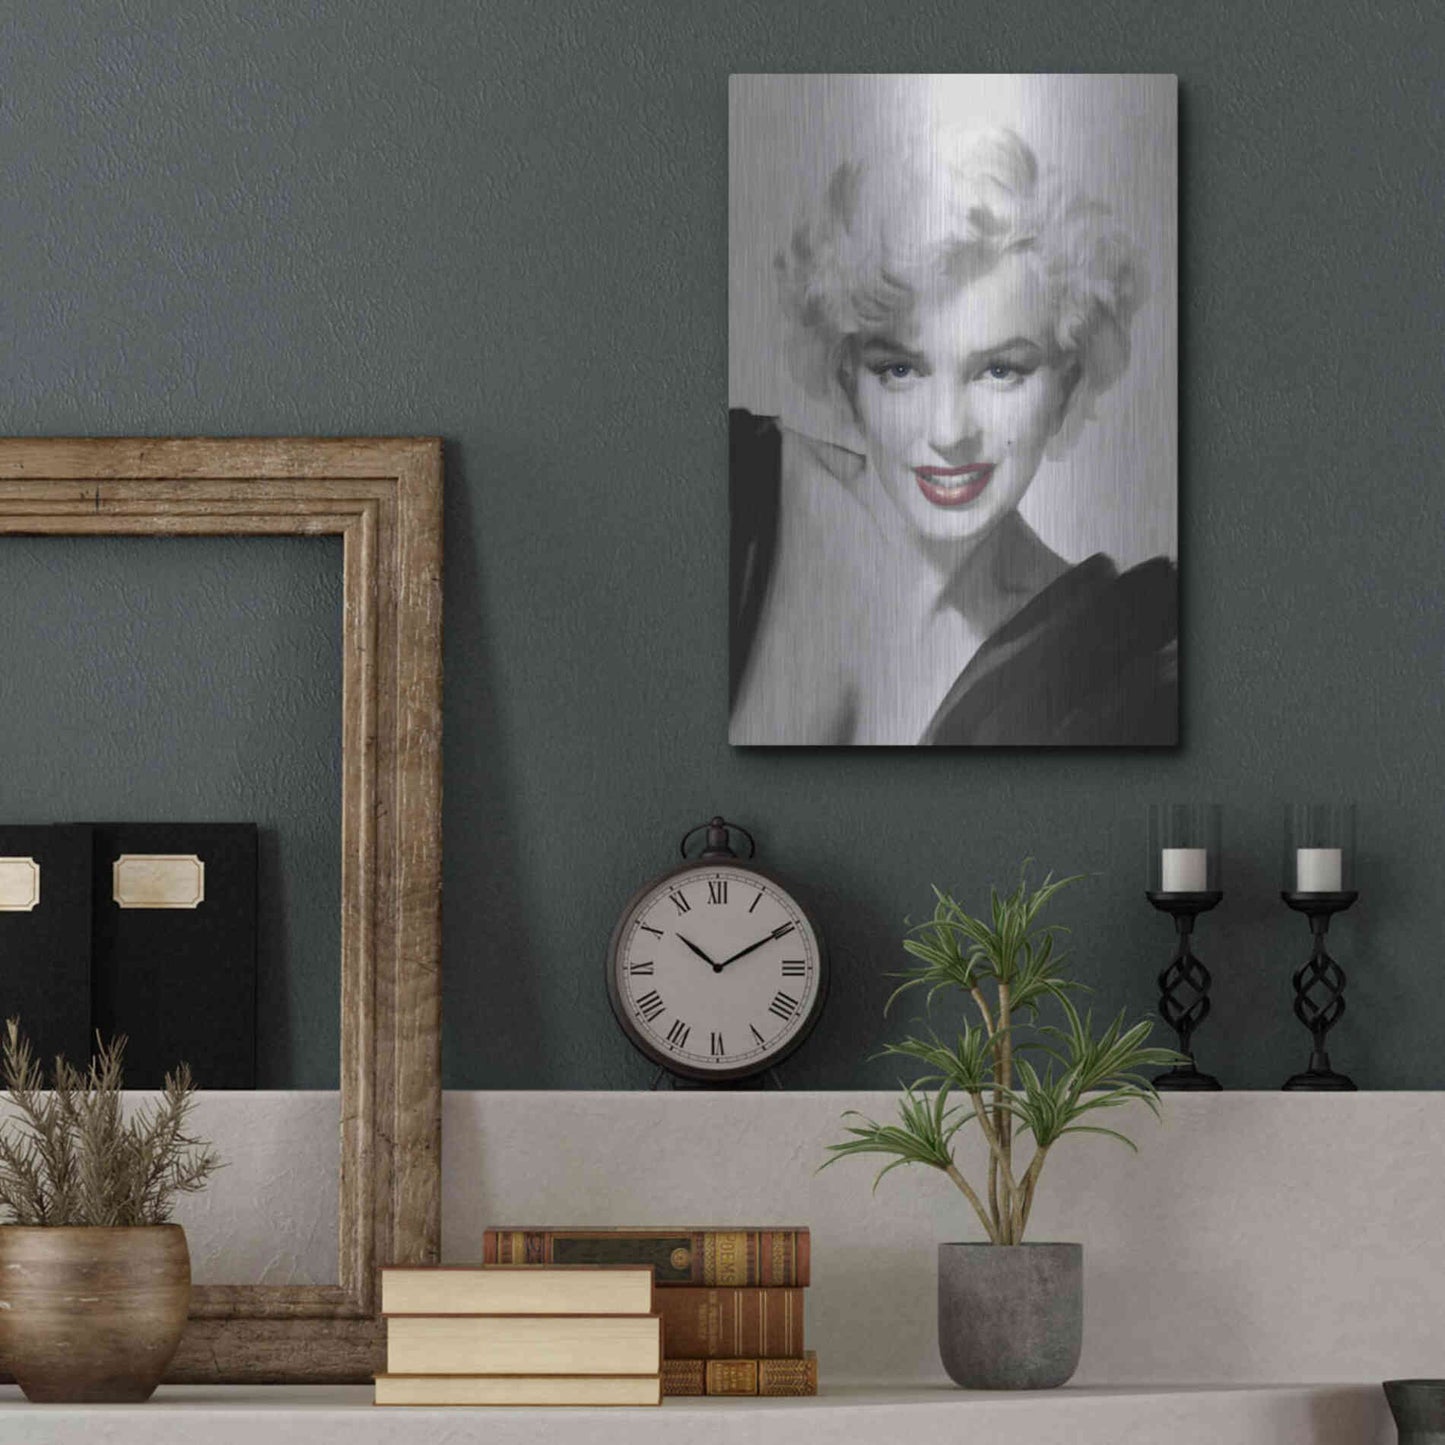 Luxe Metal Art 'The Look Red Lips' by Chris Consani, Metal Wall Art,12x16